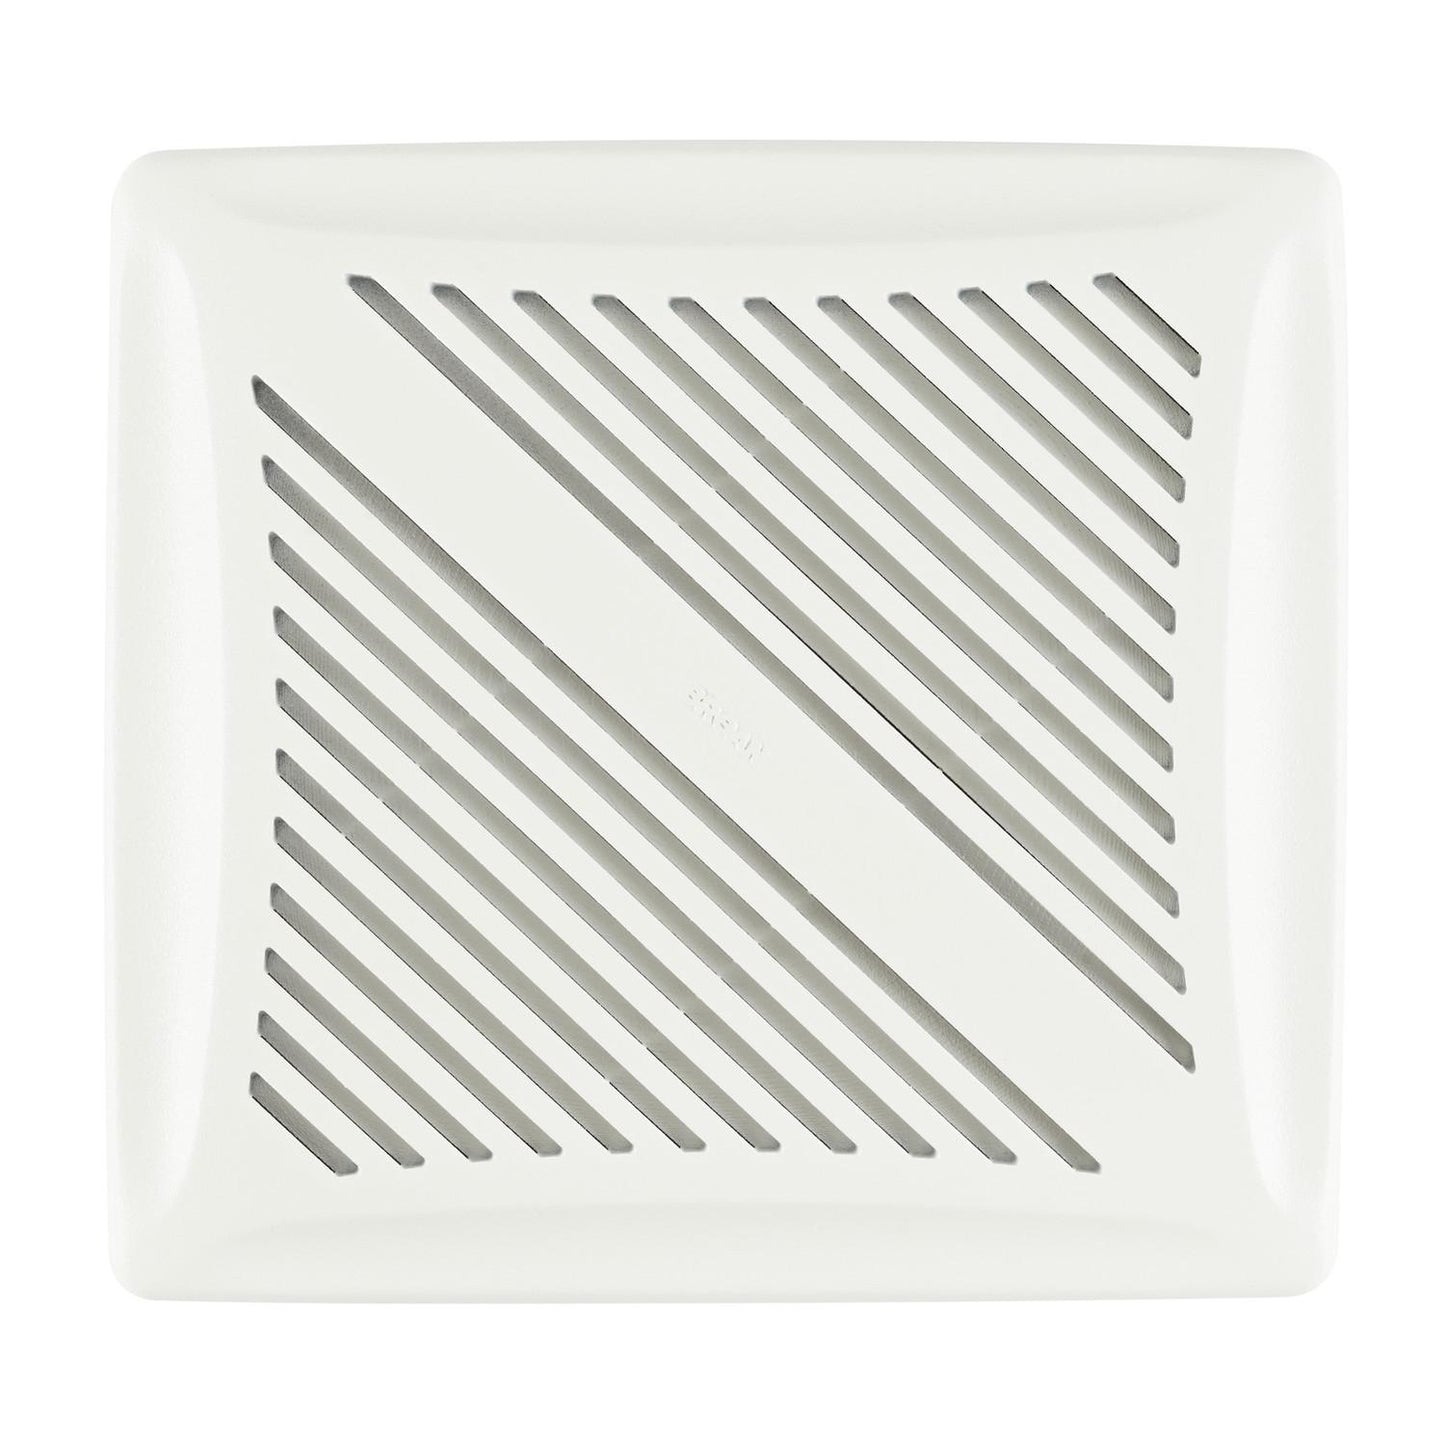 Broan AR80X Broan-Nutone® Wall Vent Kit, 3" Or 4" Round Duct